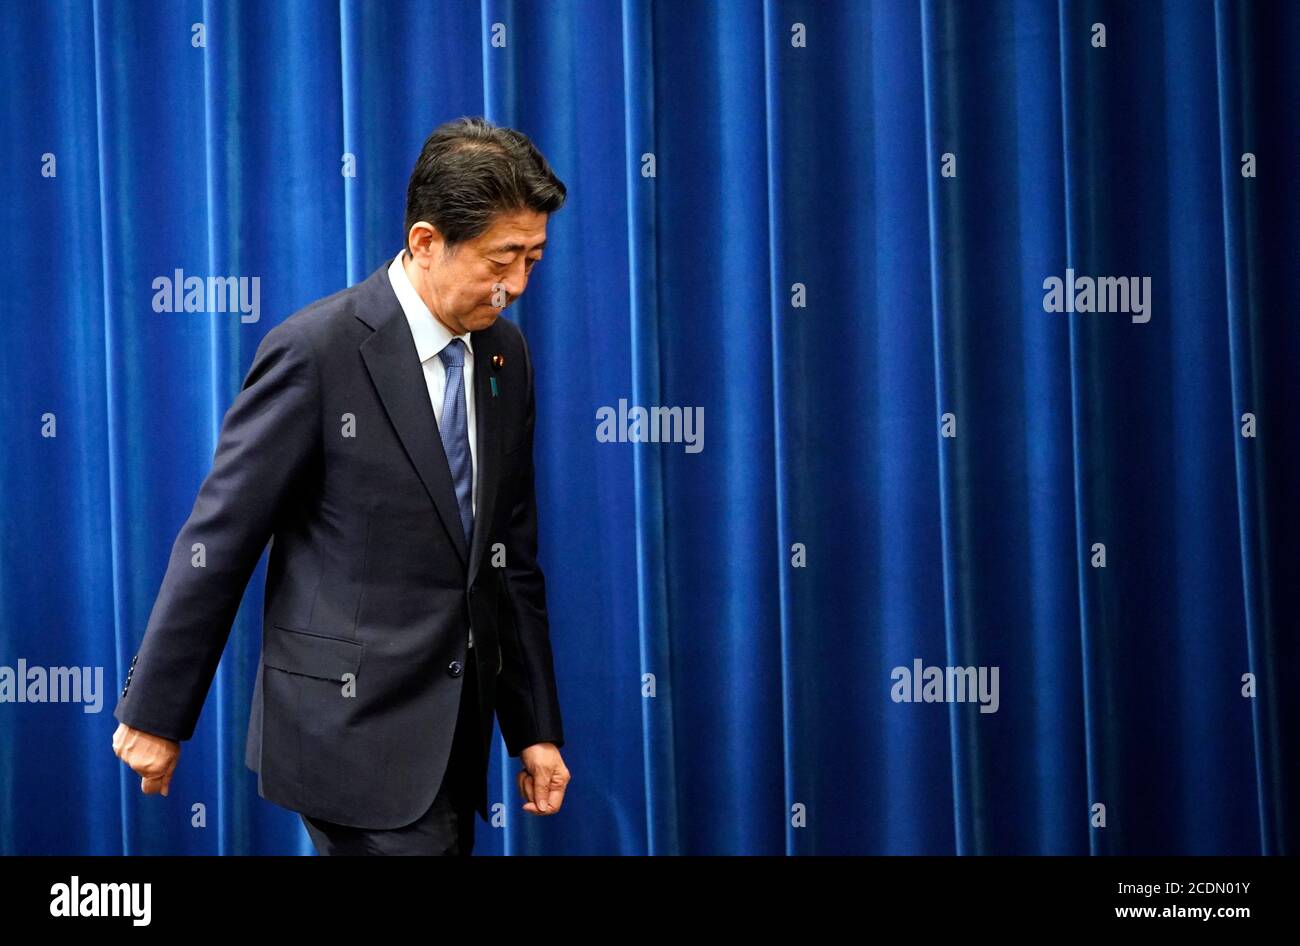 (200829) -- BEIJING, Aug. 29, 2020 (Xinhua) -- Japanese Prime Minister Shinzo Abe leaves after a press conference in Tokyo, Japan, Aug. 28, 2020. Japanese Prime Minister Shinzo Abe said at a press conference Friday that he would step down from his post due to health concerns. (Franck Robichon/Pool via Xinhua) Stock Photo